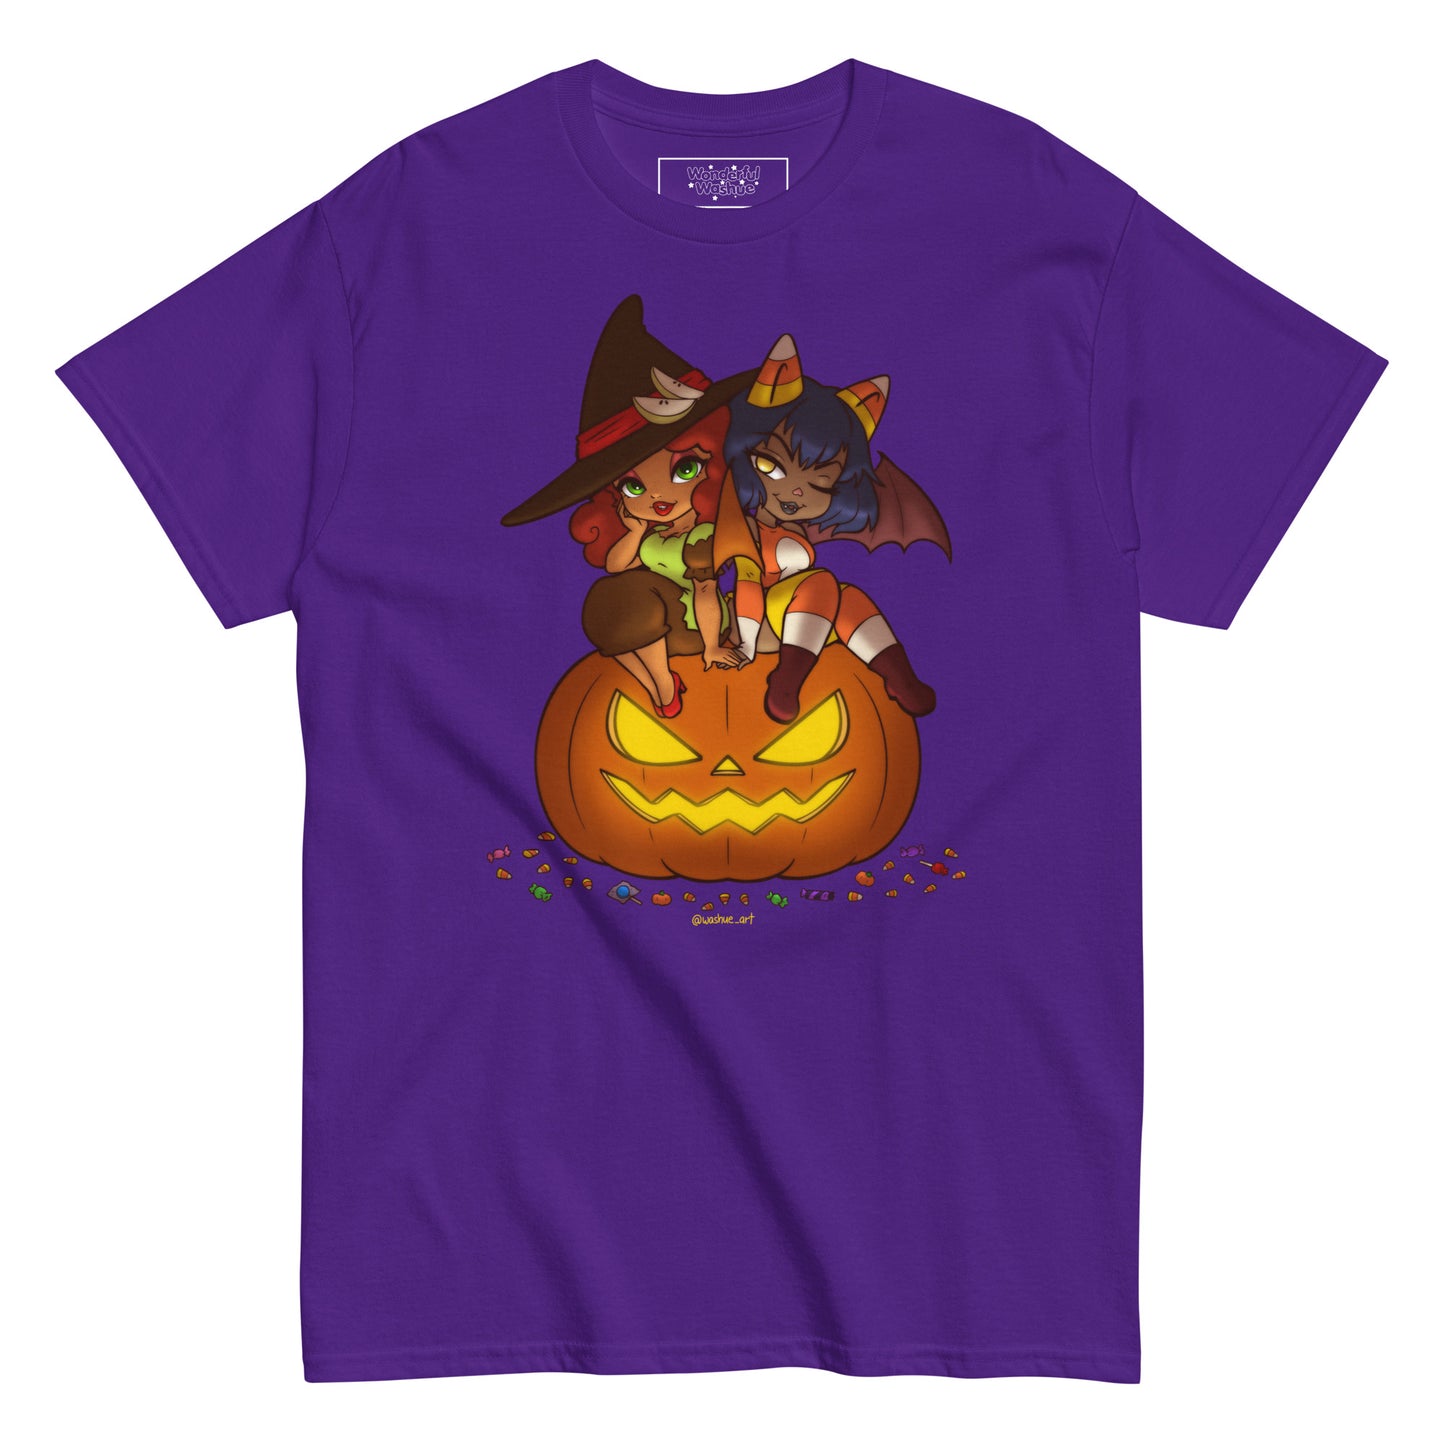 Candy Apple and Candy Corn Halloween T-Shirt